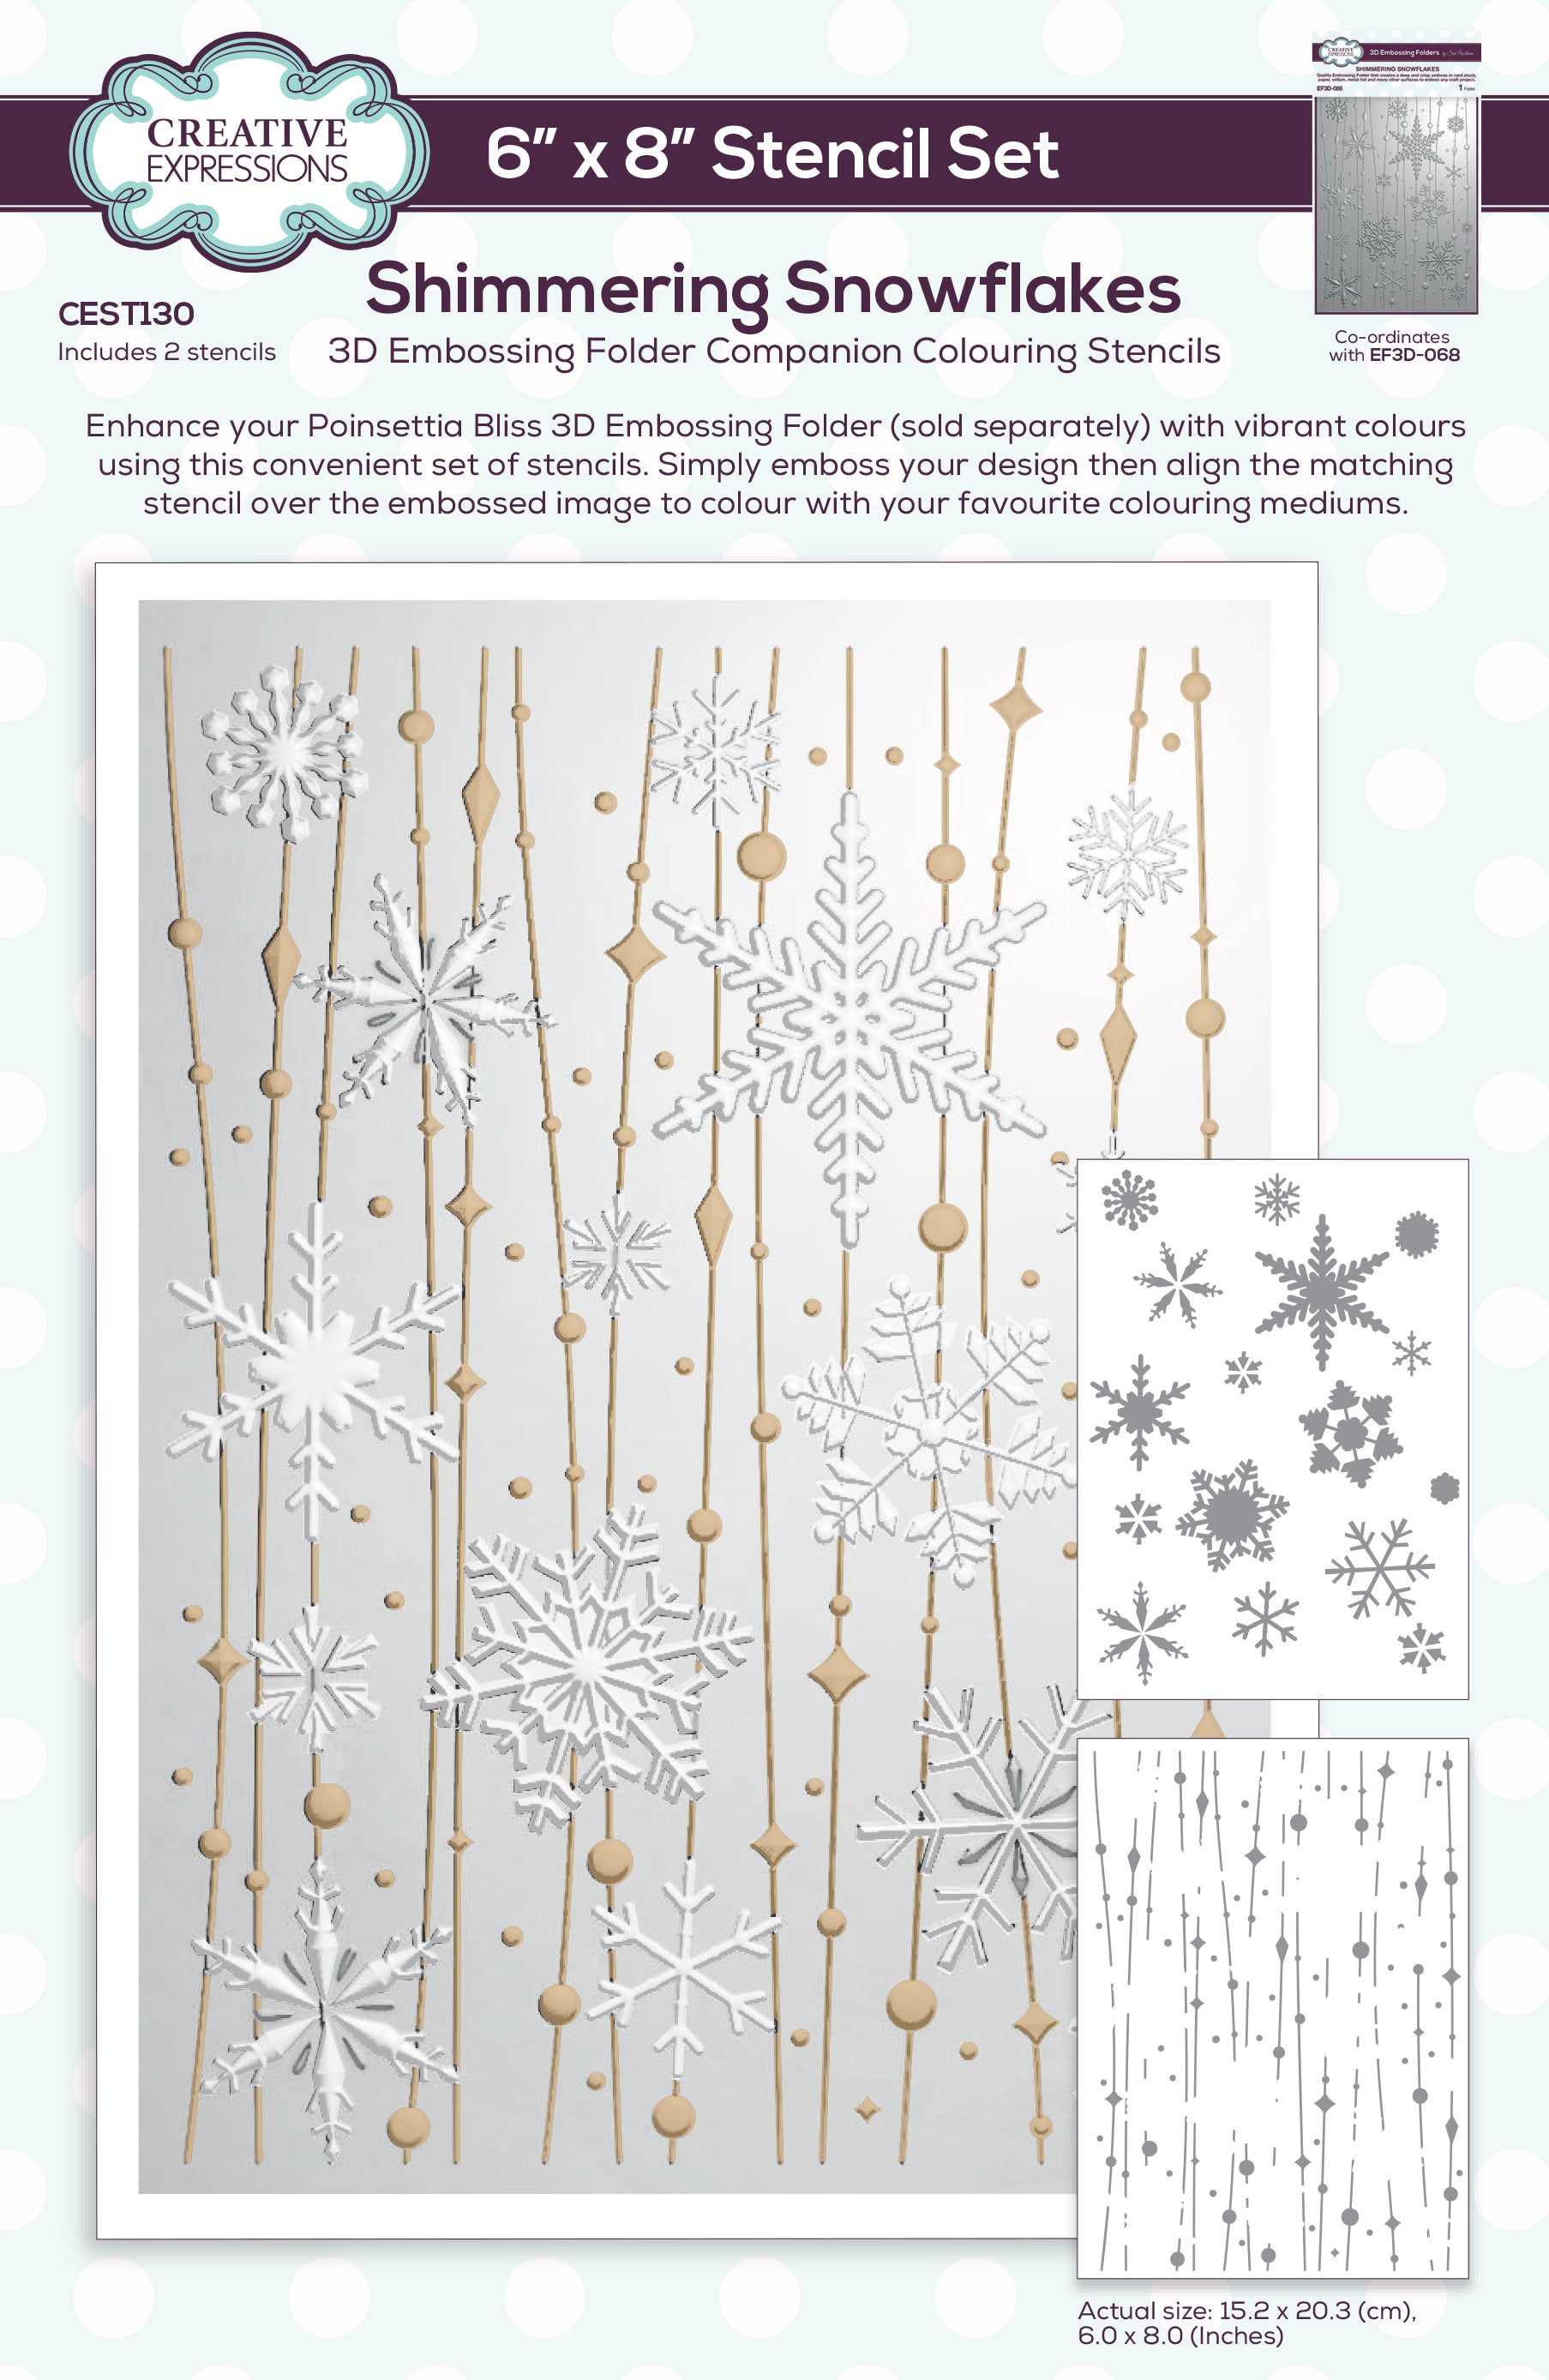 Creative Expressions Shimmering Snowflakes Companion Colouring Stencil Set 6 in x 8 in 2pk